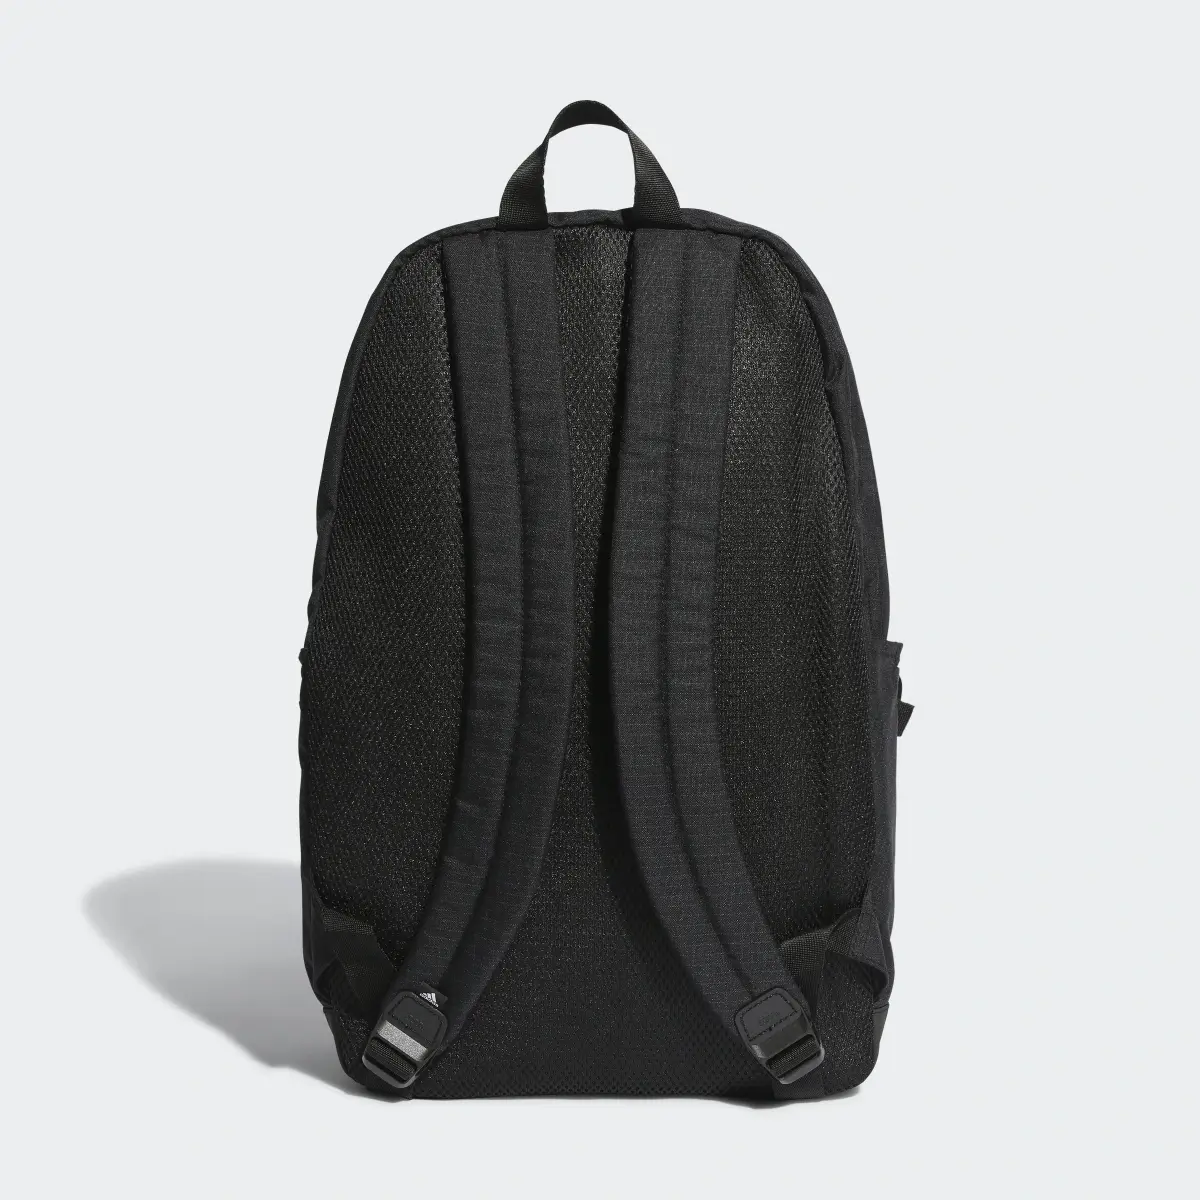 Adidas Back to School Backpack. 3